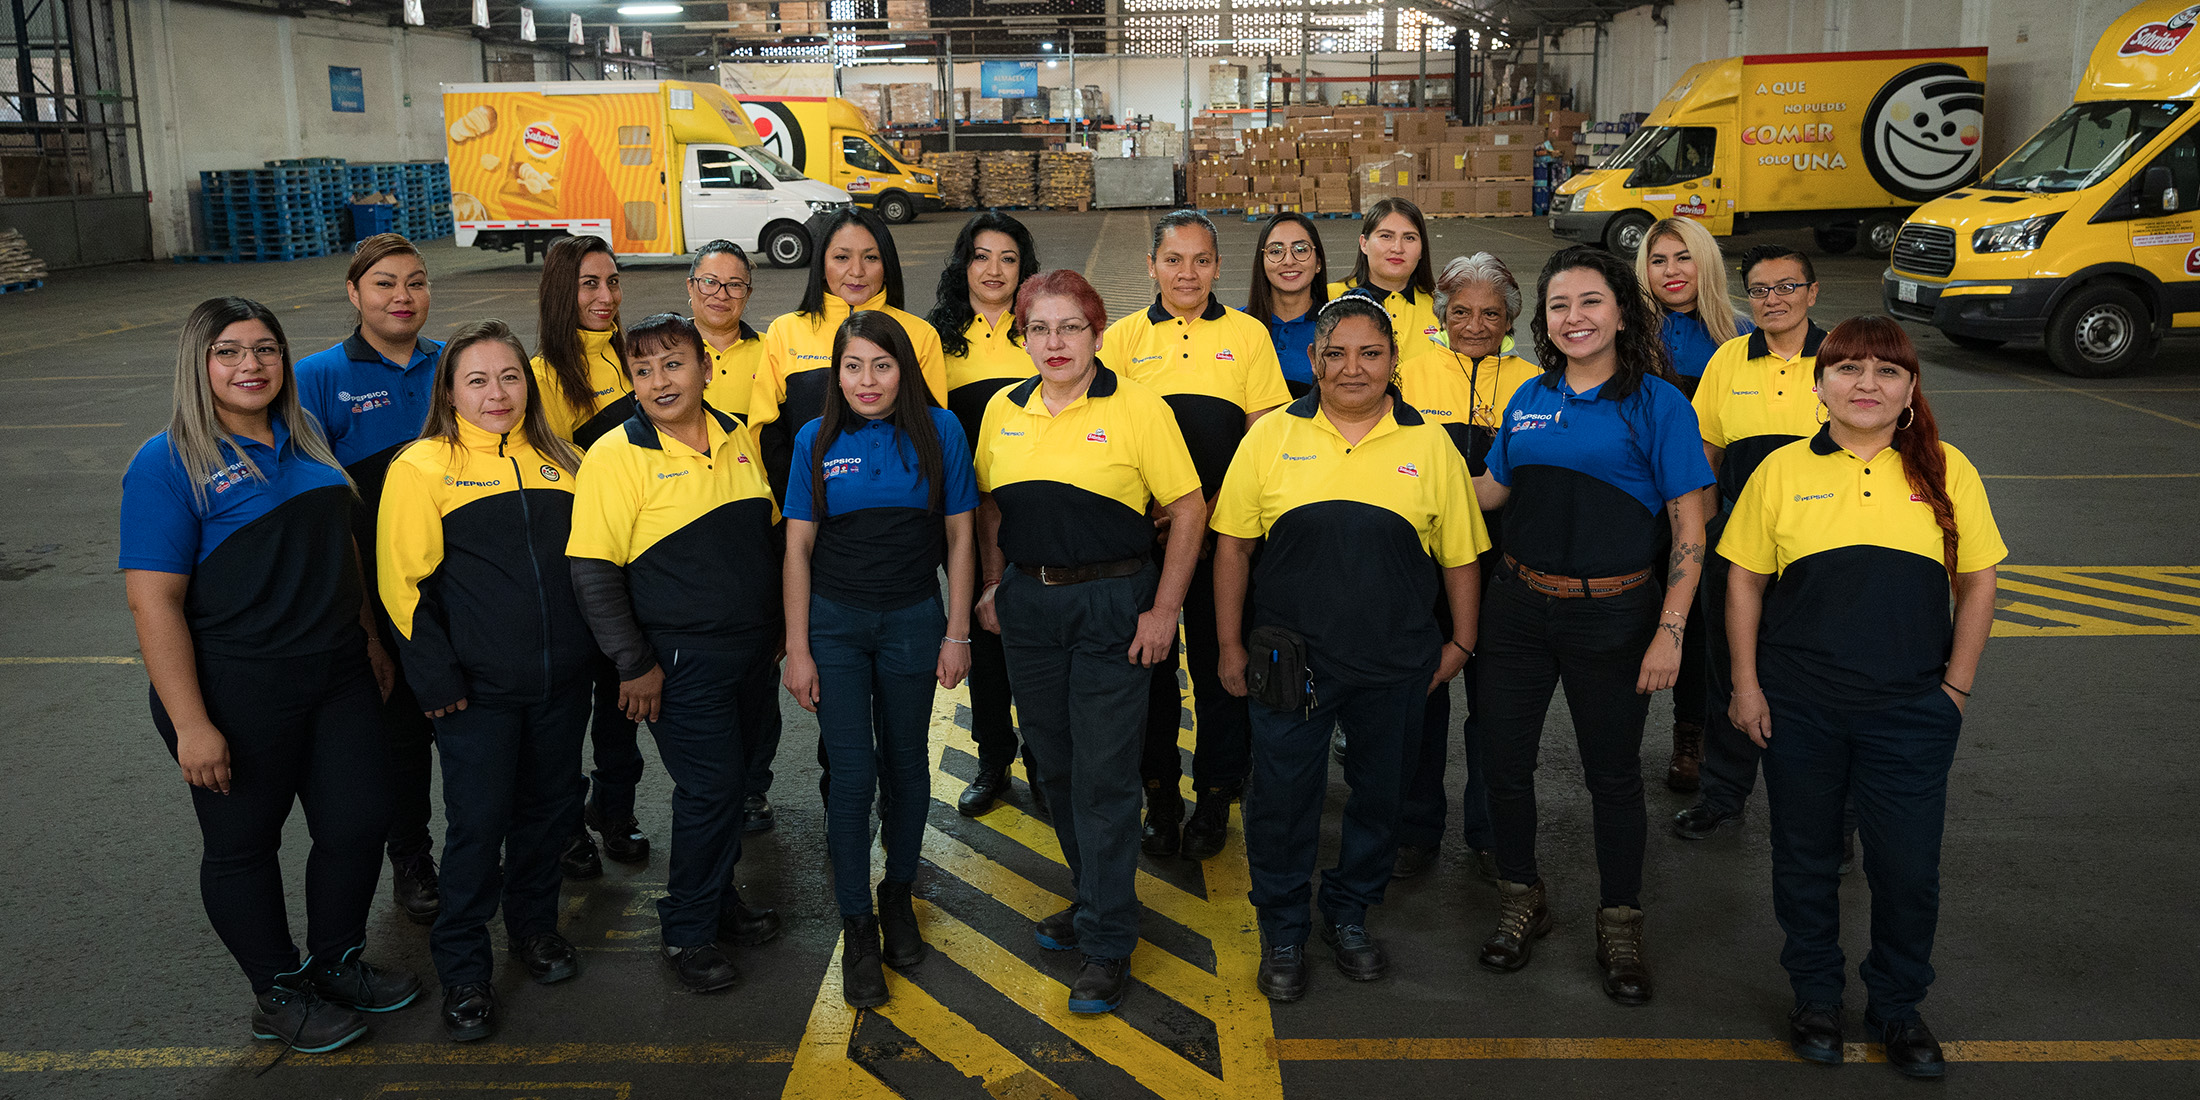 Associates standing together in a distribution center